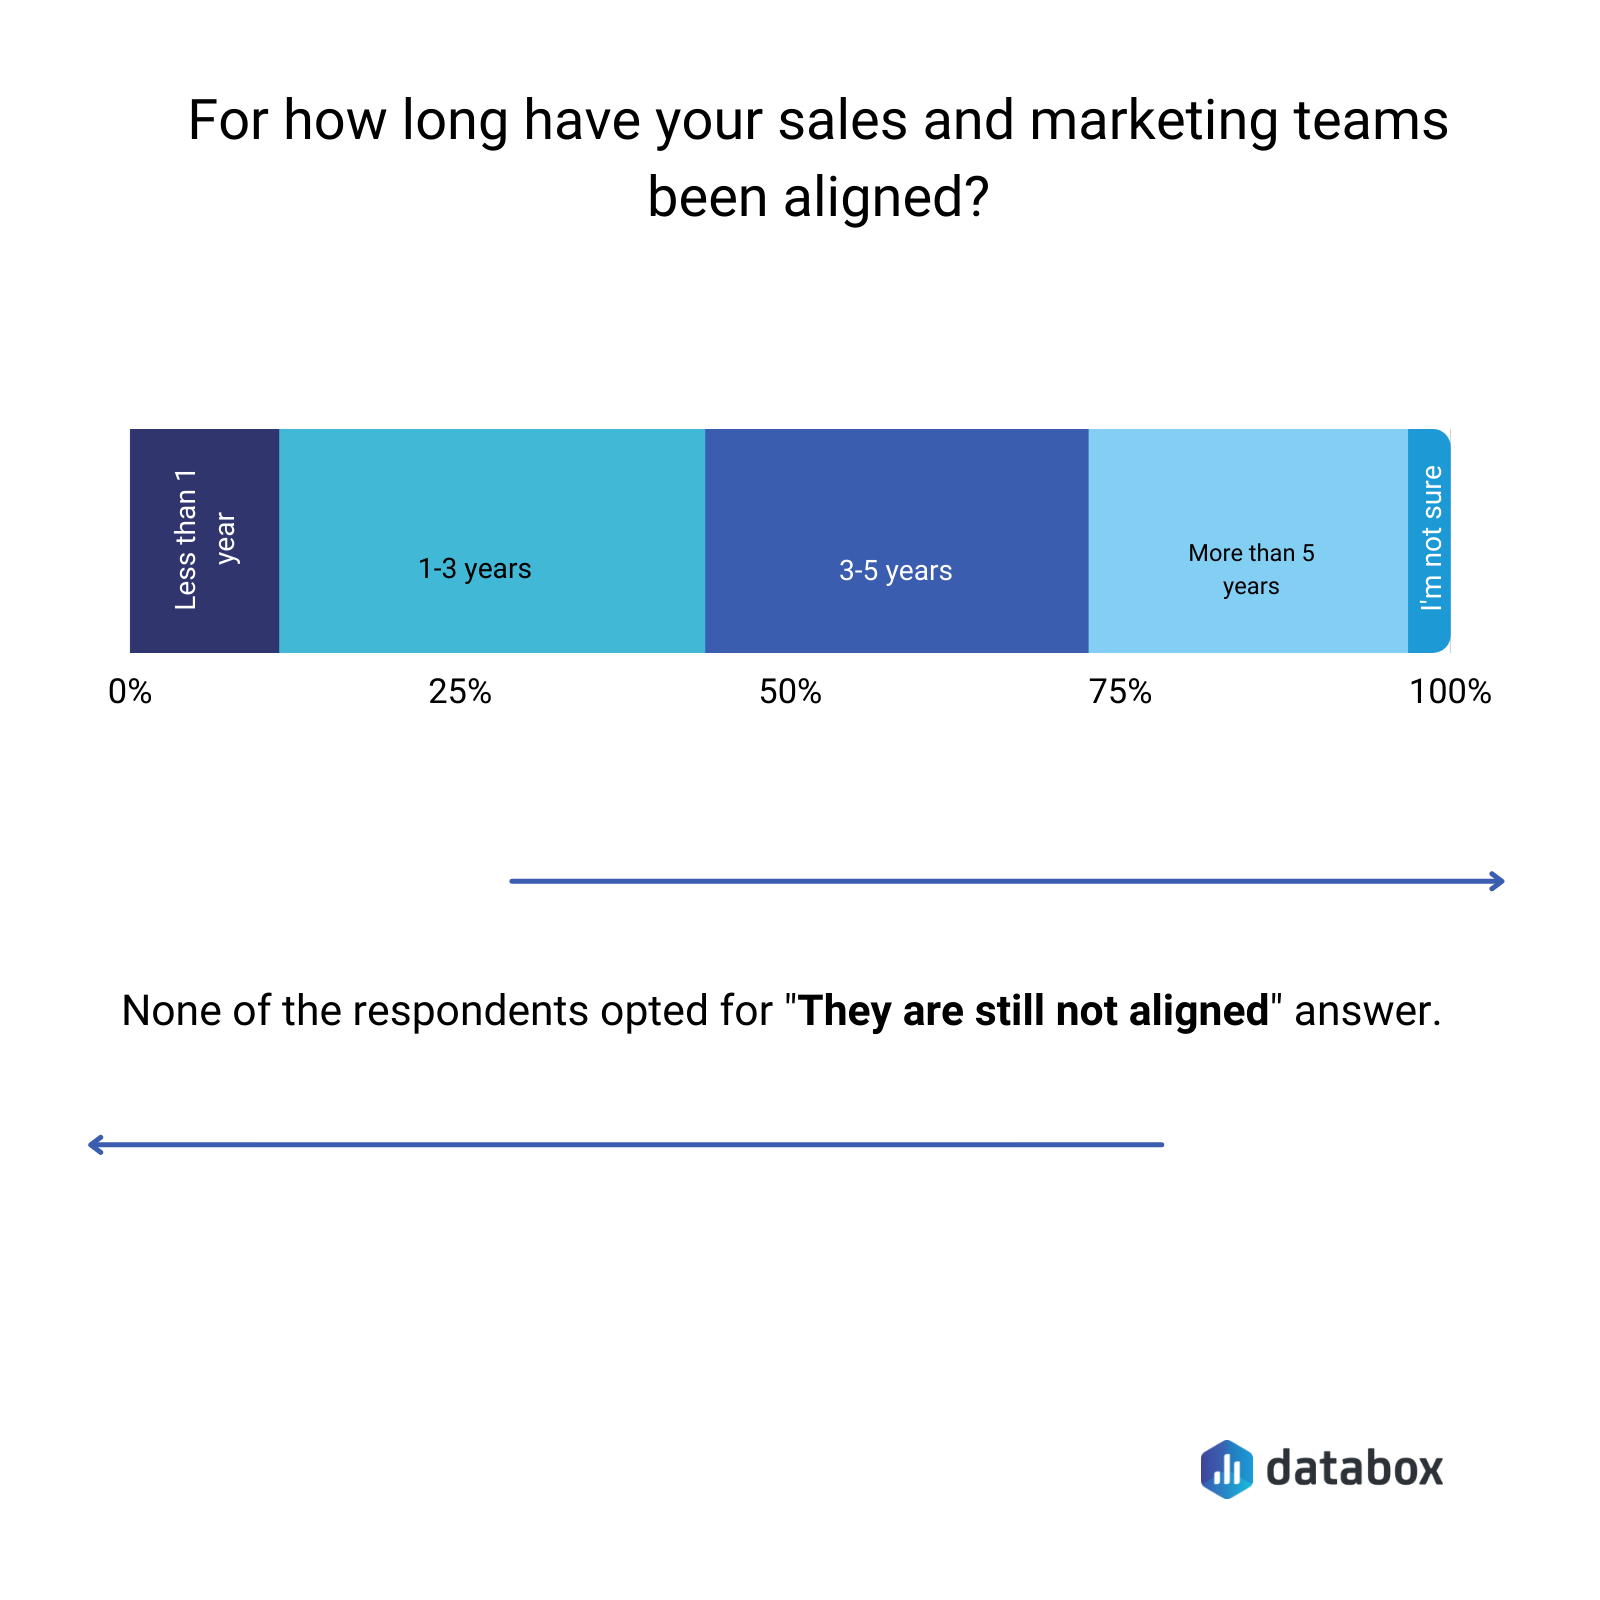 for how long have your sales and marketing teams been aligned